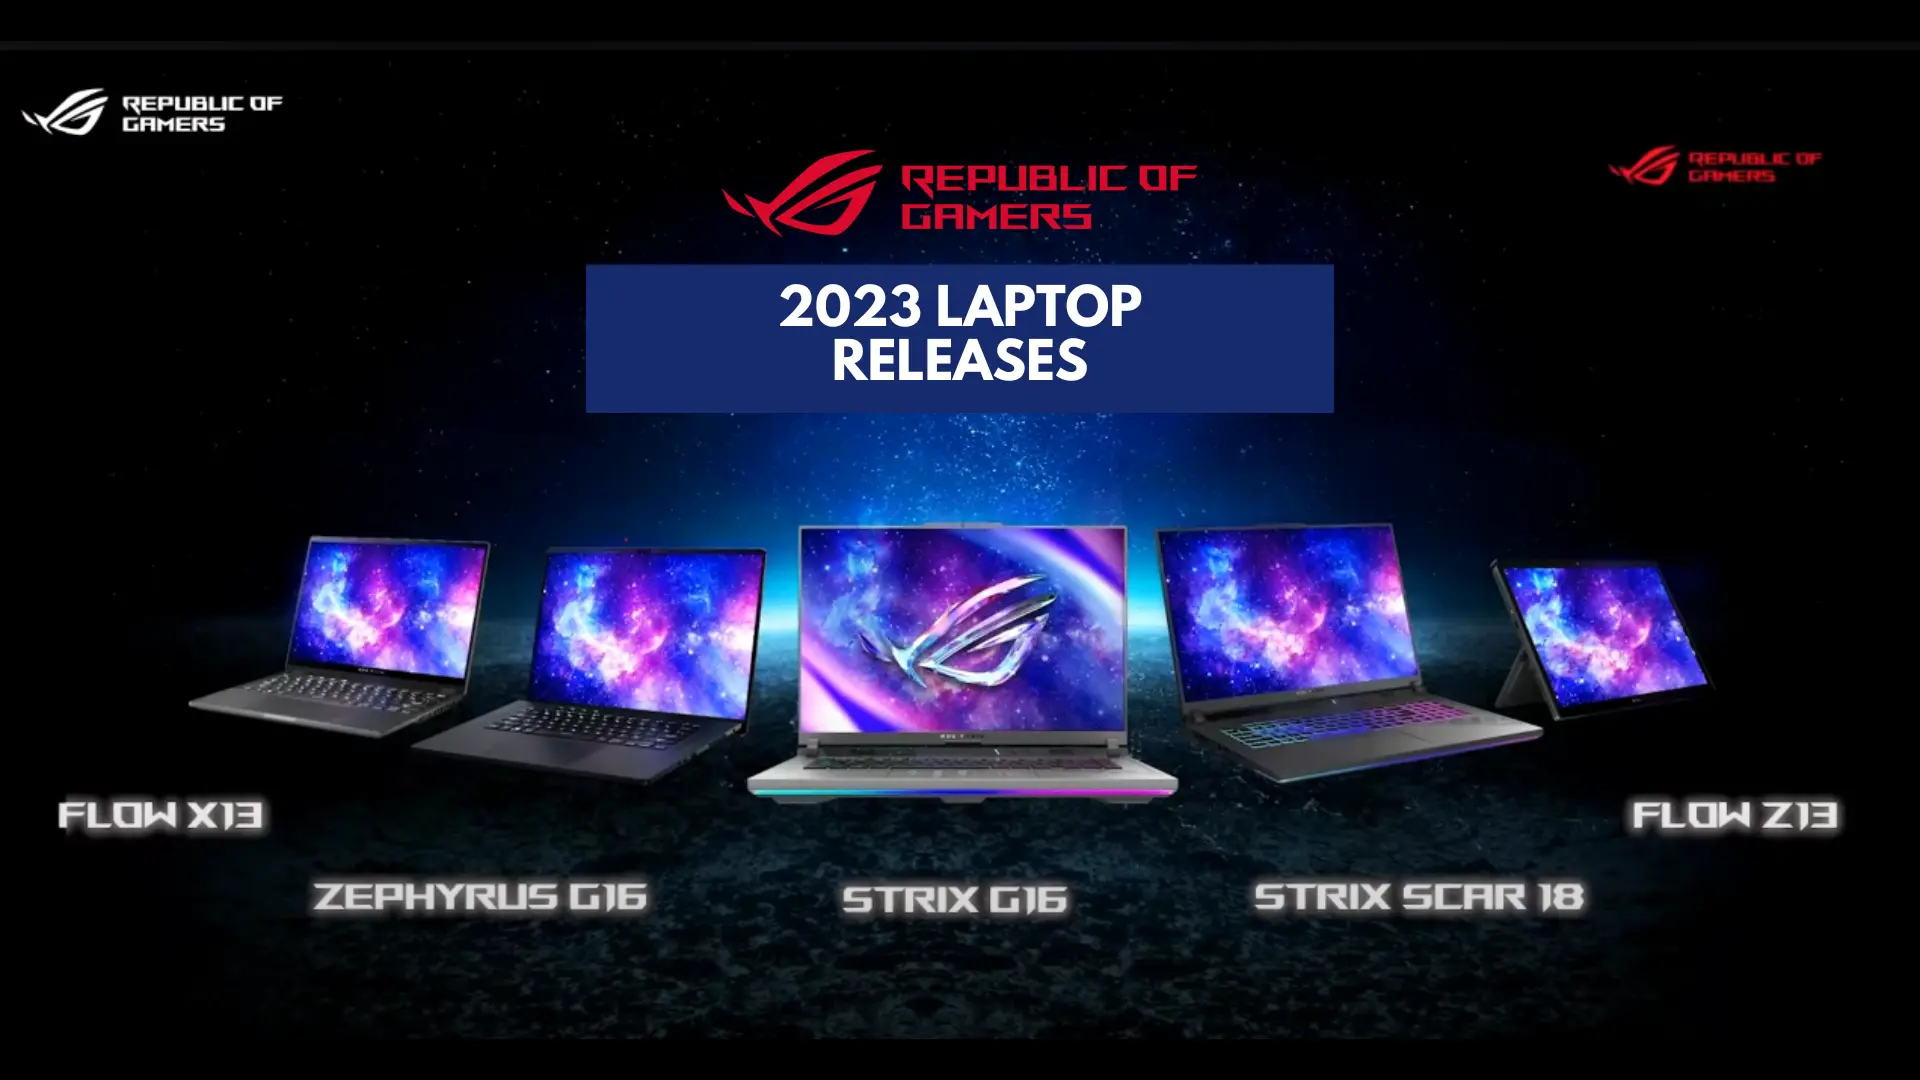 Asus ROG new laptops are decked out. Here’s every laptop announced at CES 2023